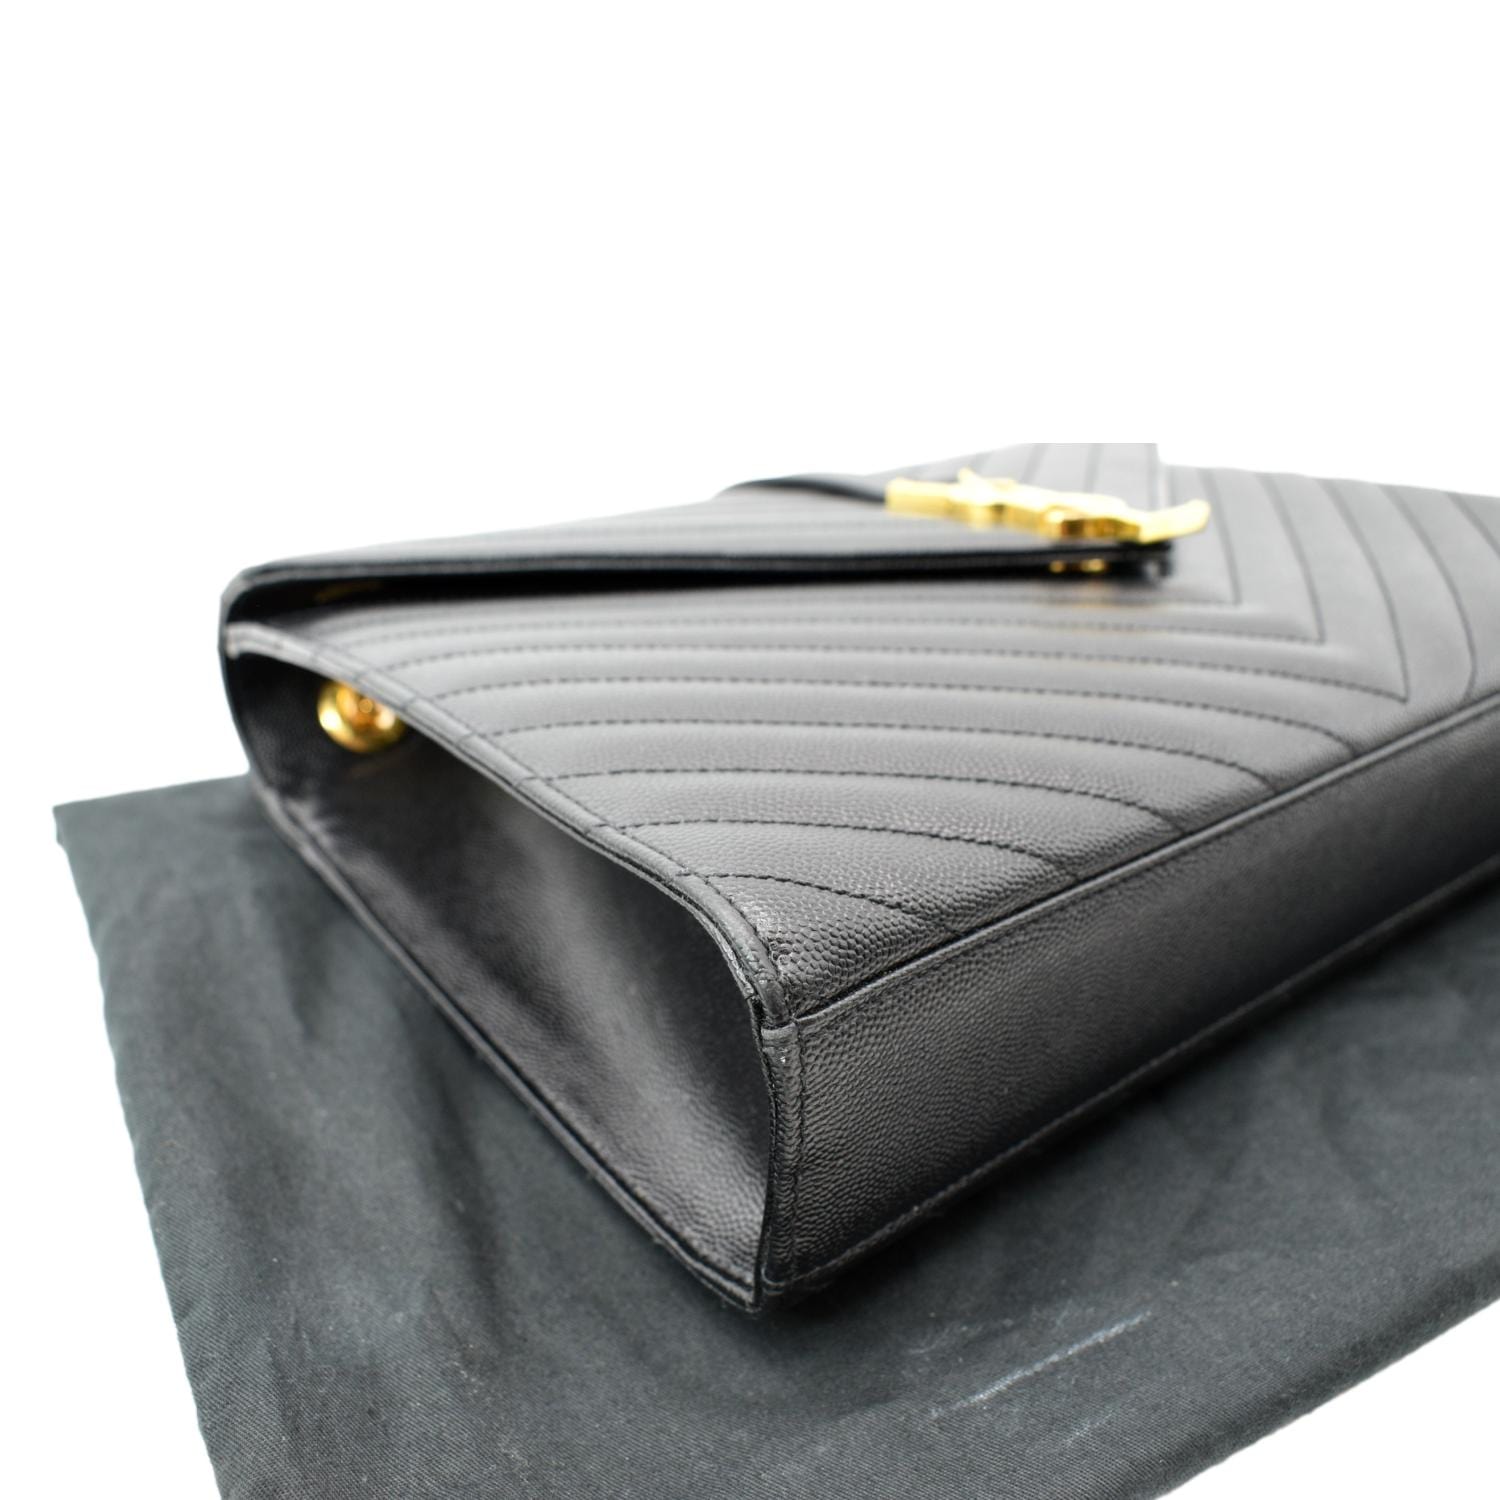 large envelope chain bag in black textured mixed matelassé leather